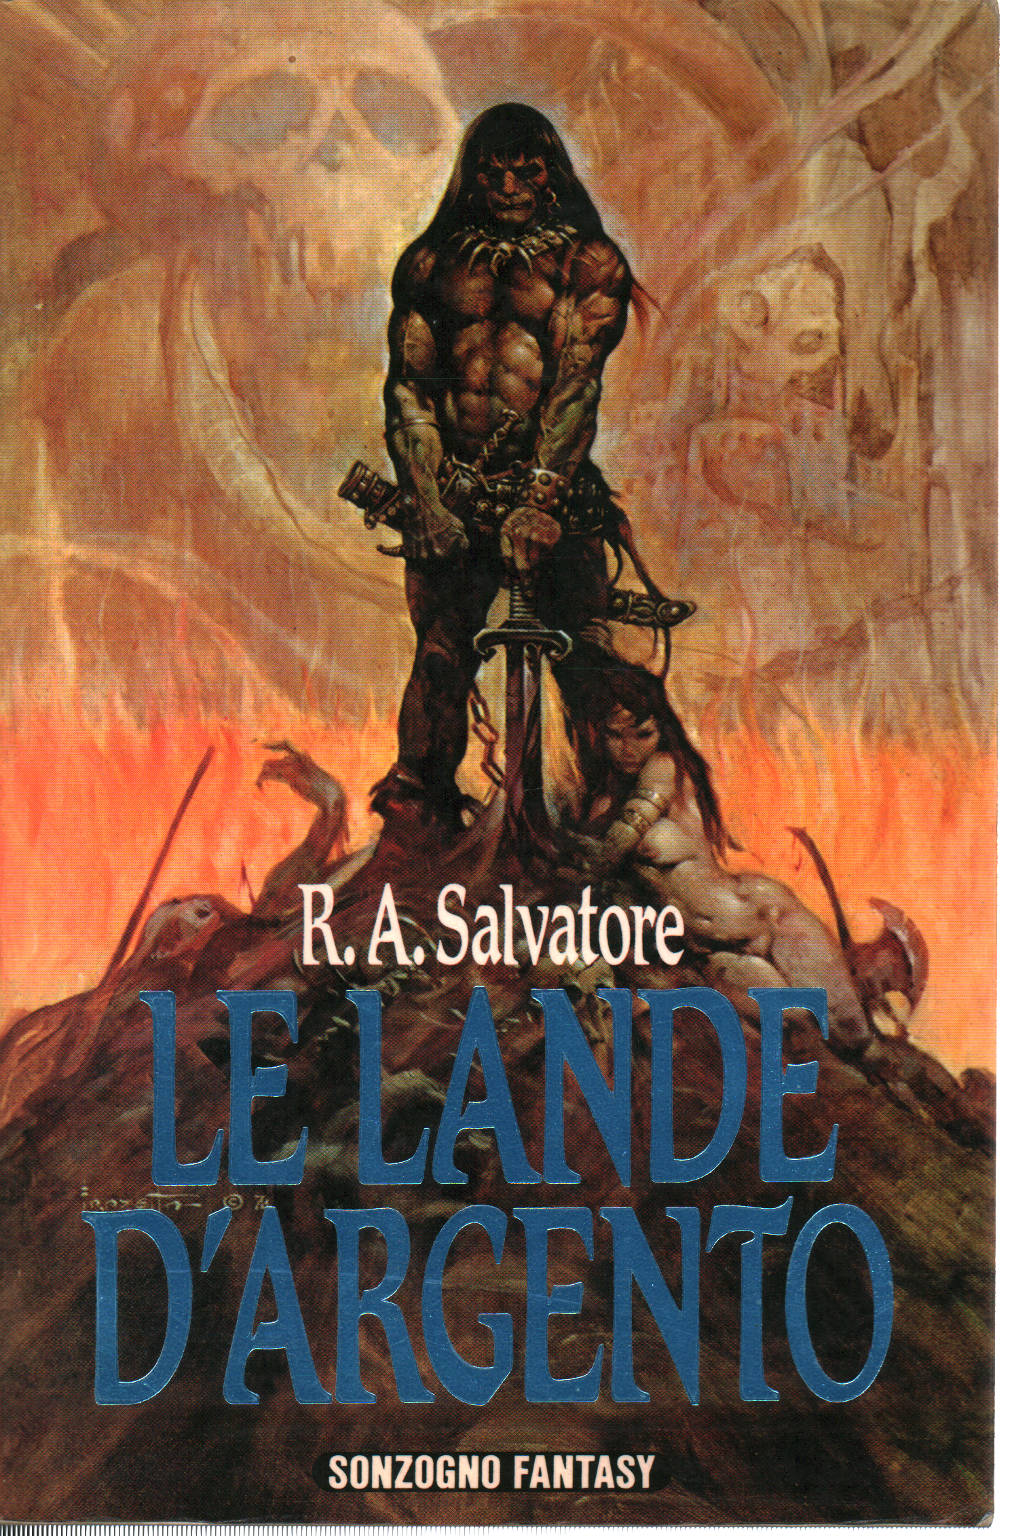 The silver lands, R.A.Salvatore